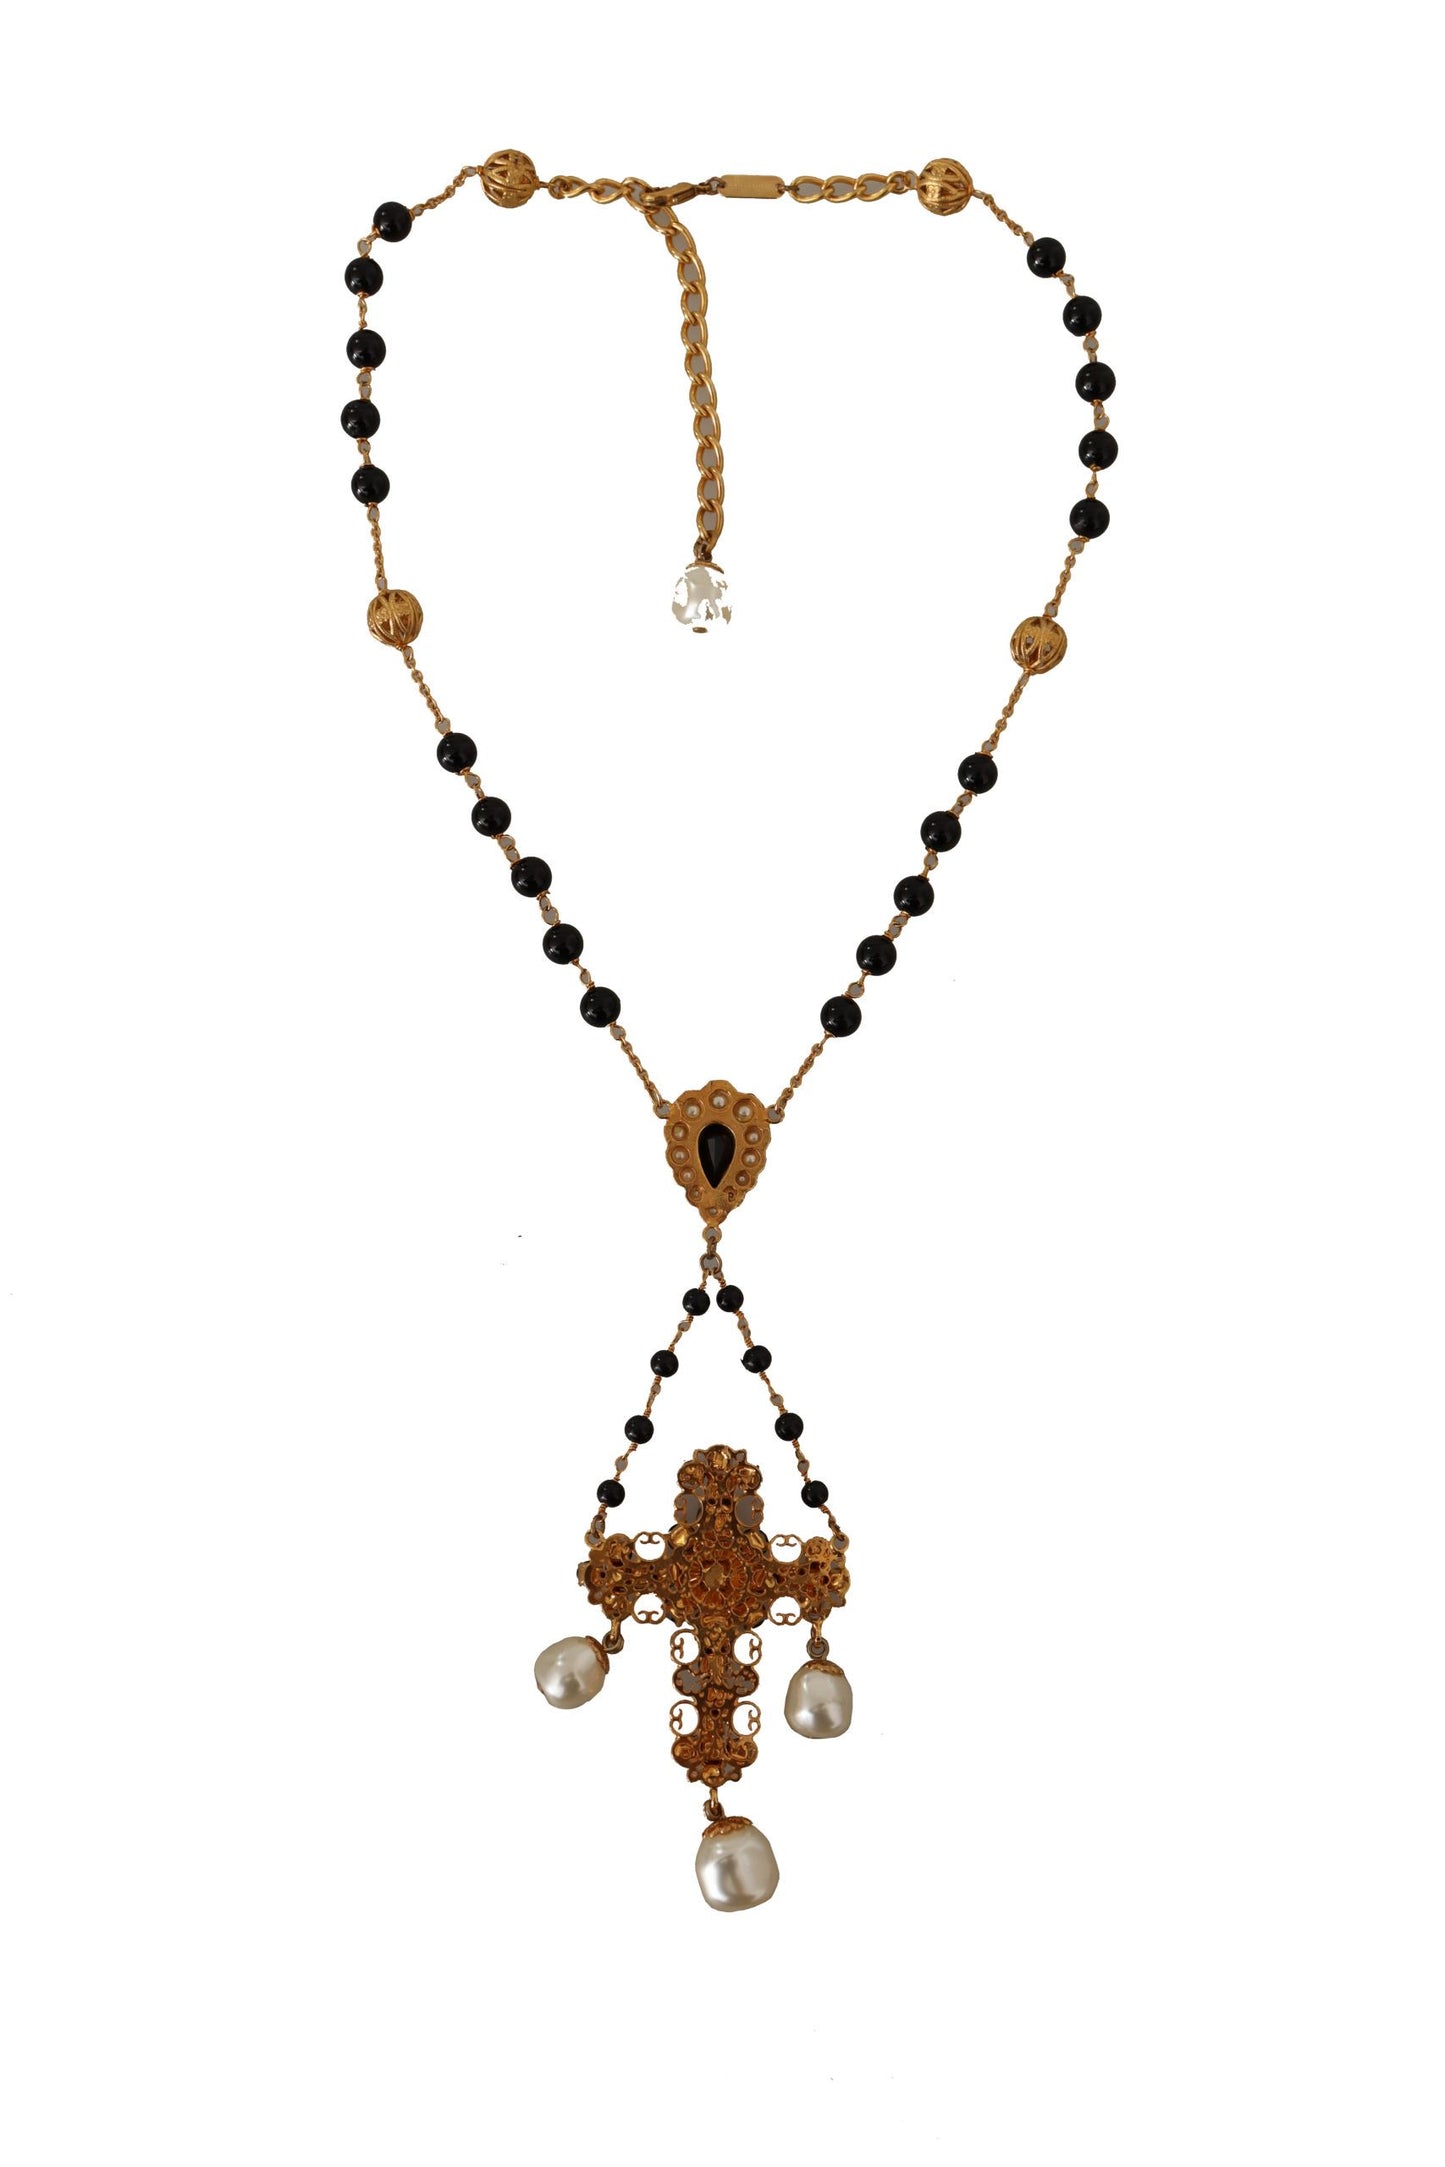 Elegant Charm Cross Necklace in Gold Tone